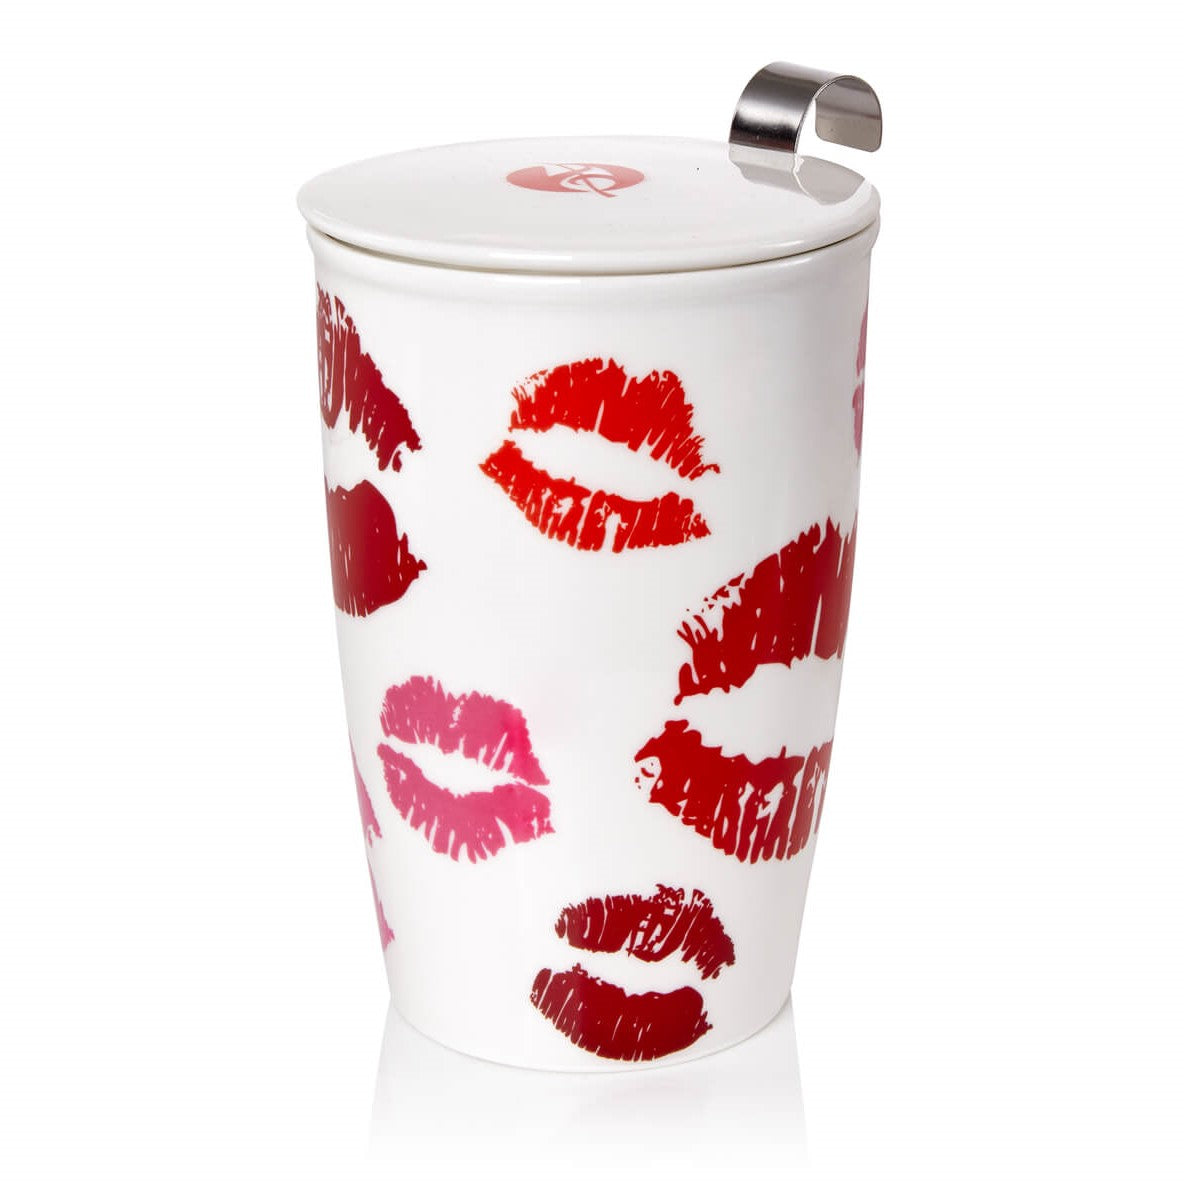 Double-wall Porcelain Mug with Infuser - Adore